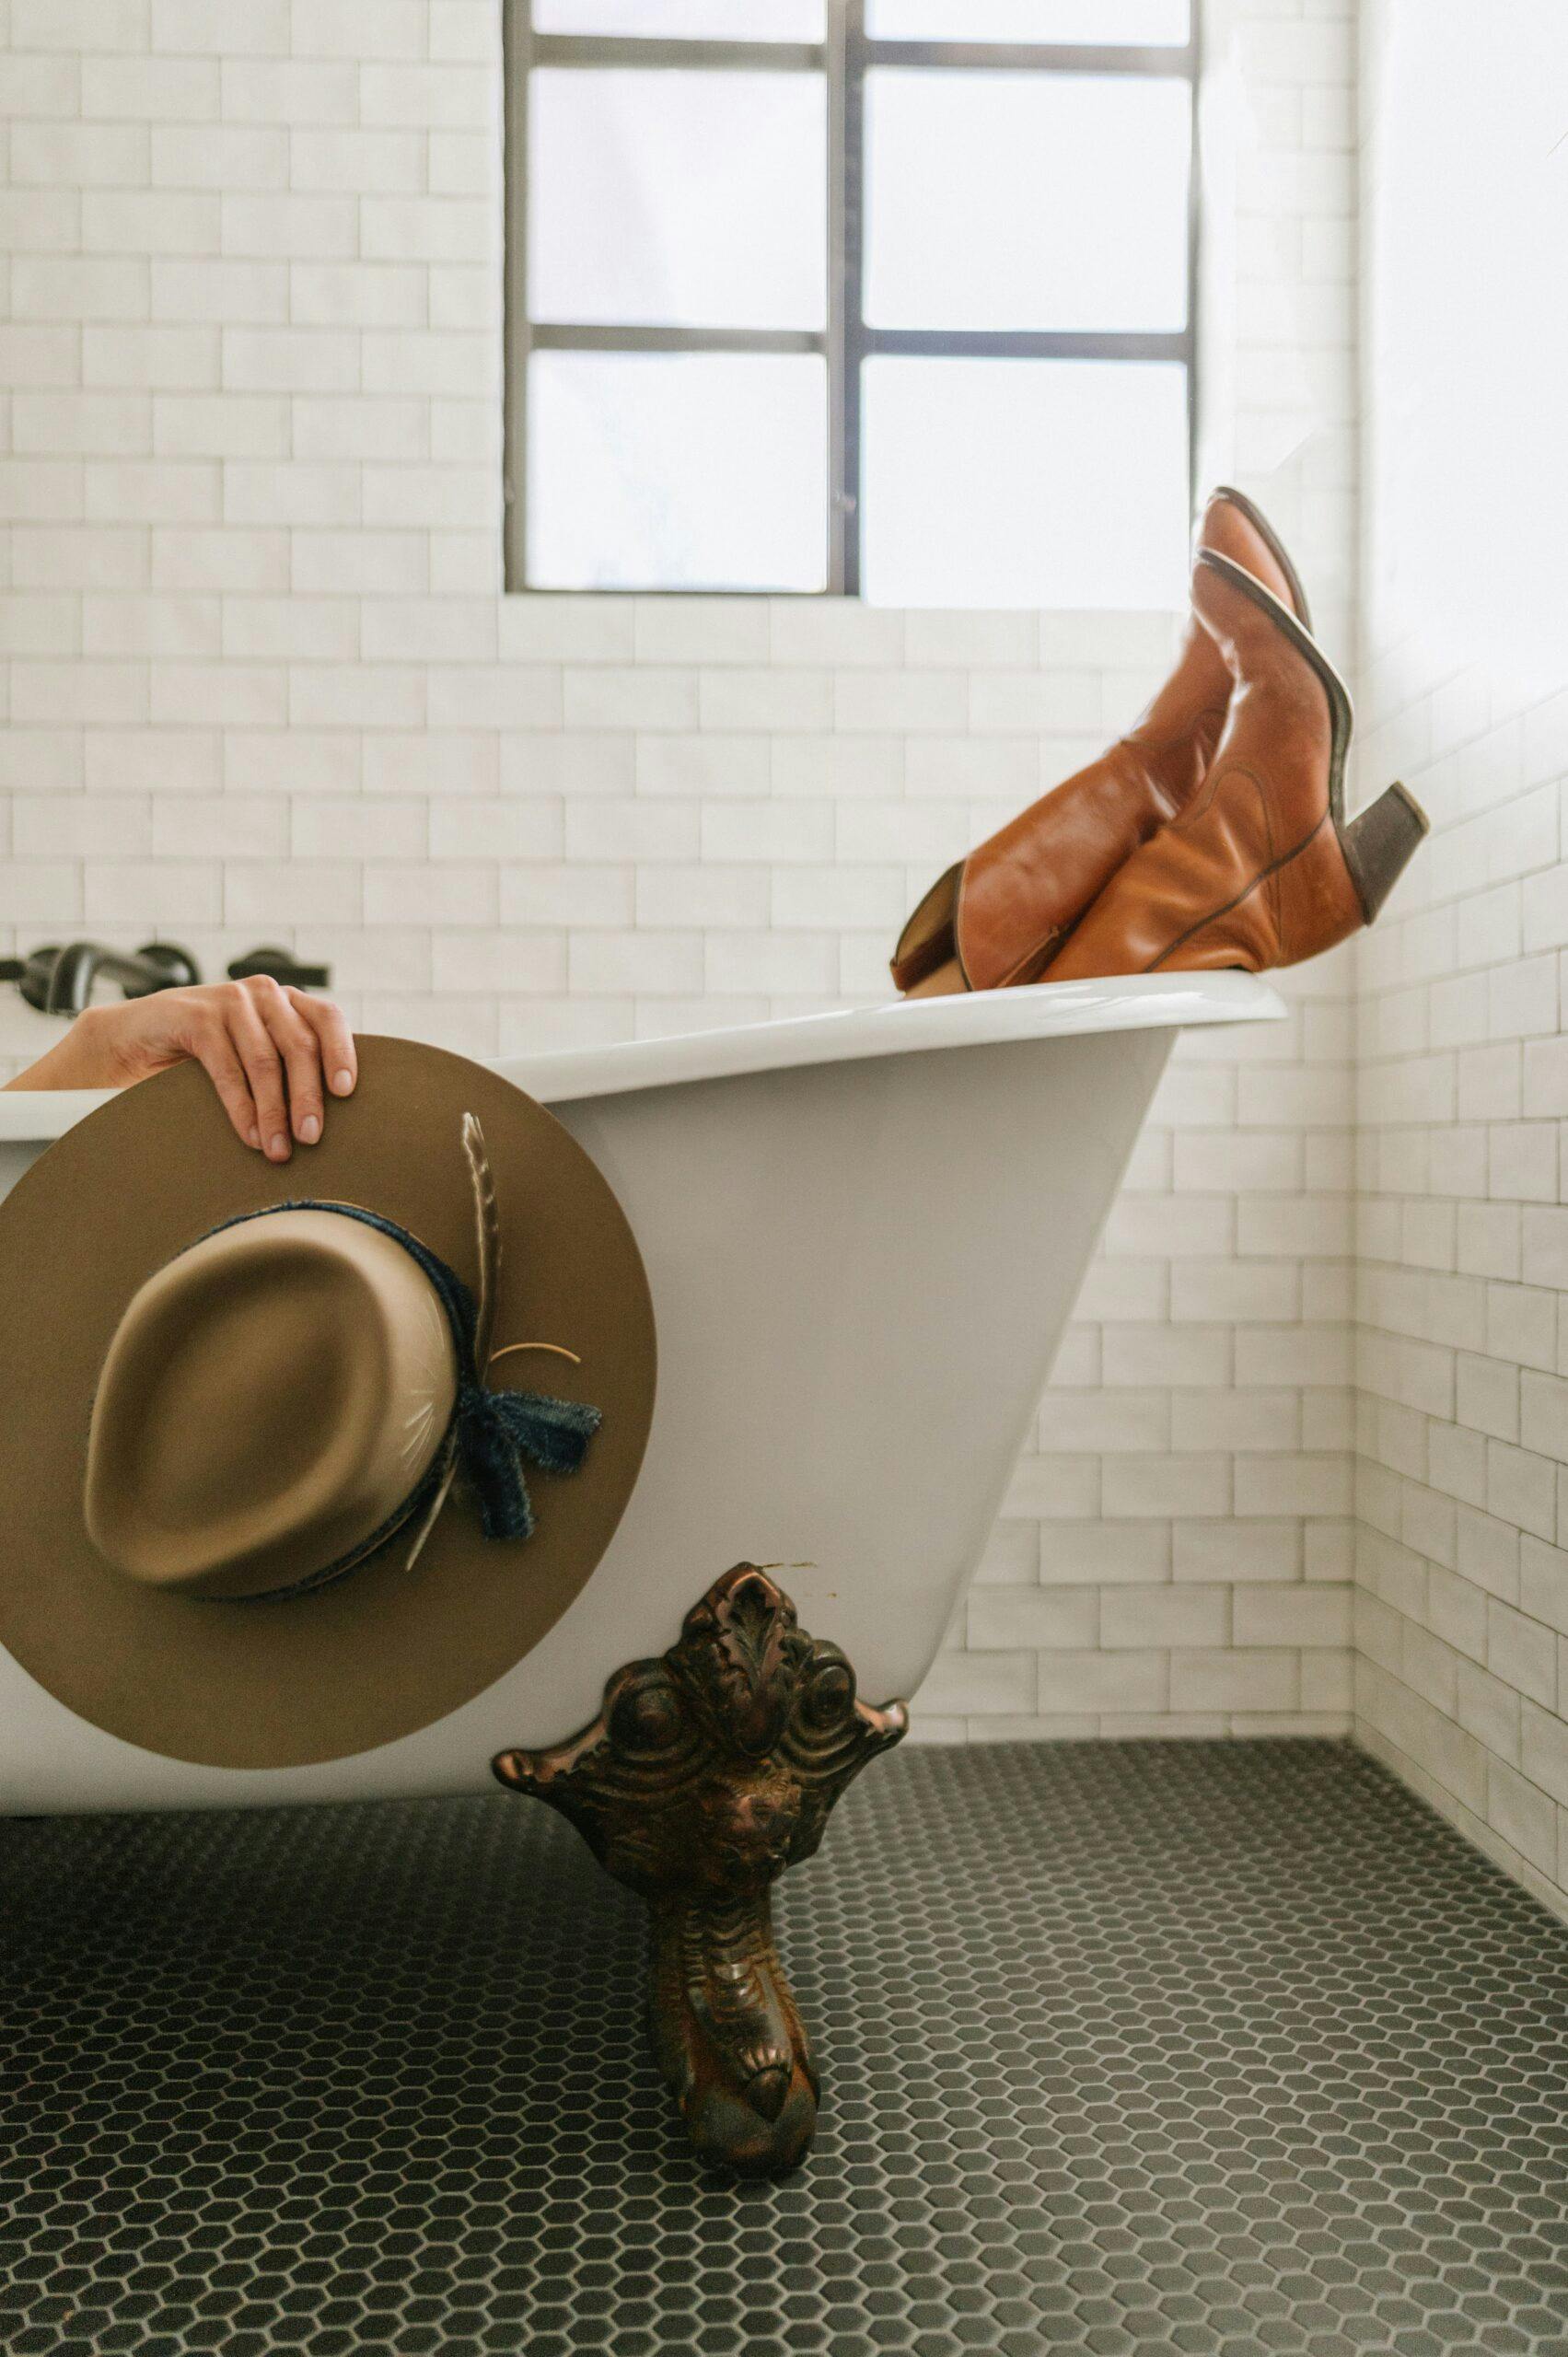 person sitting in bathtub showing cowboy boots and holding cowboy hat over tub rim